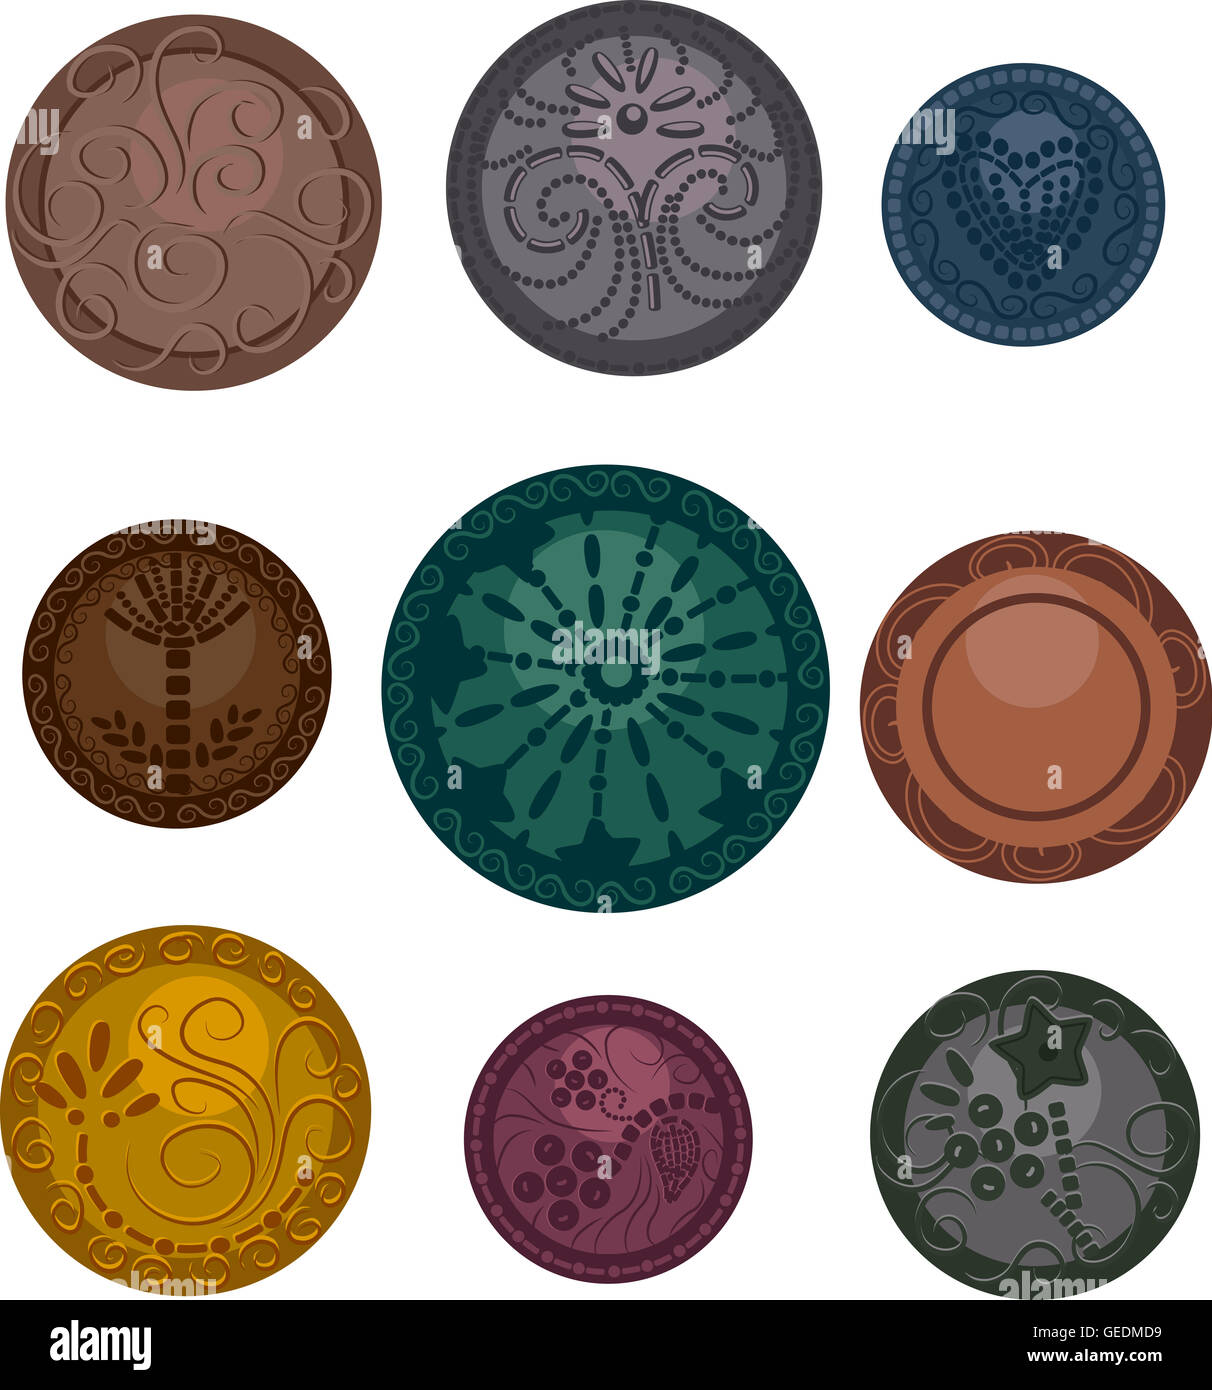 Illustration Featuring Metallic Buttons with Elaborate Designs Stock Photo